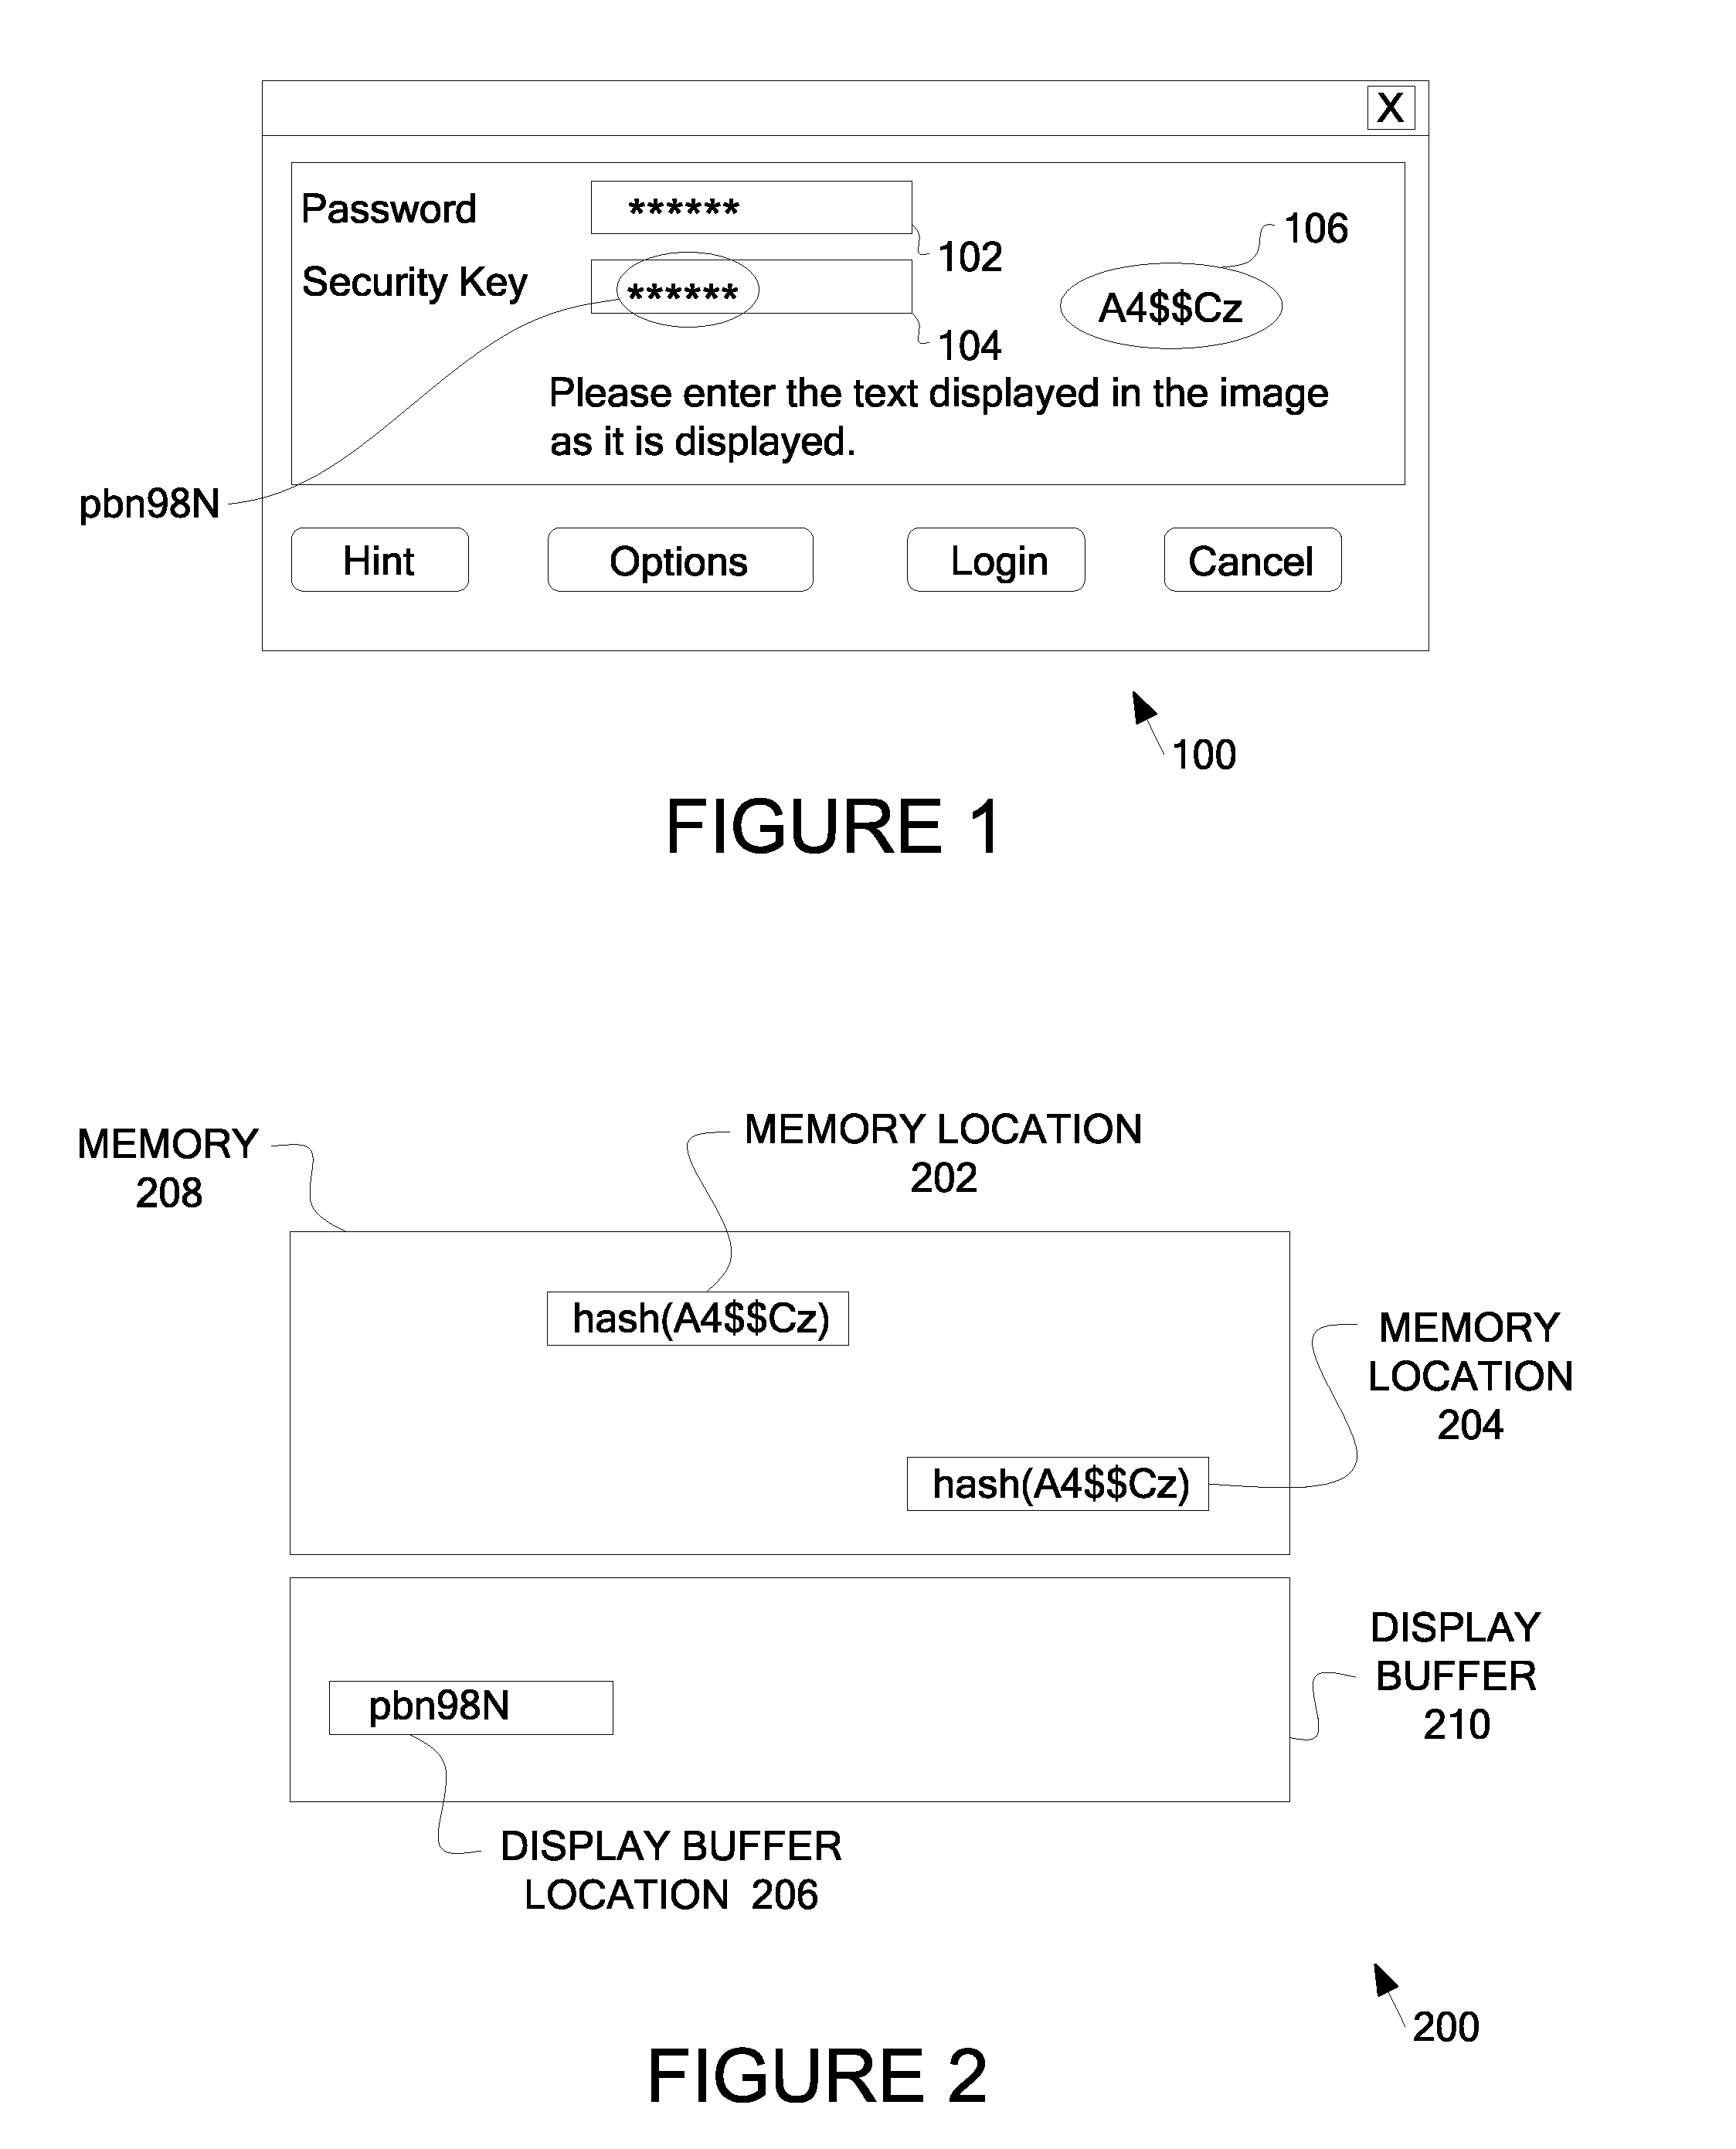 System and Method of Generating and Providing a Set of Randomly Selected Substitute Characters in Place of a User Entered Key Phrase